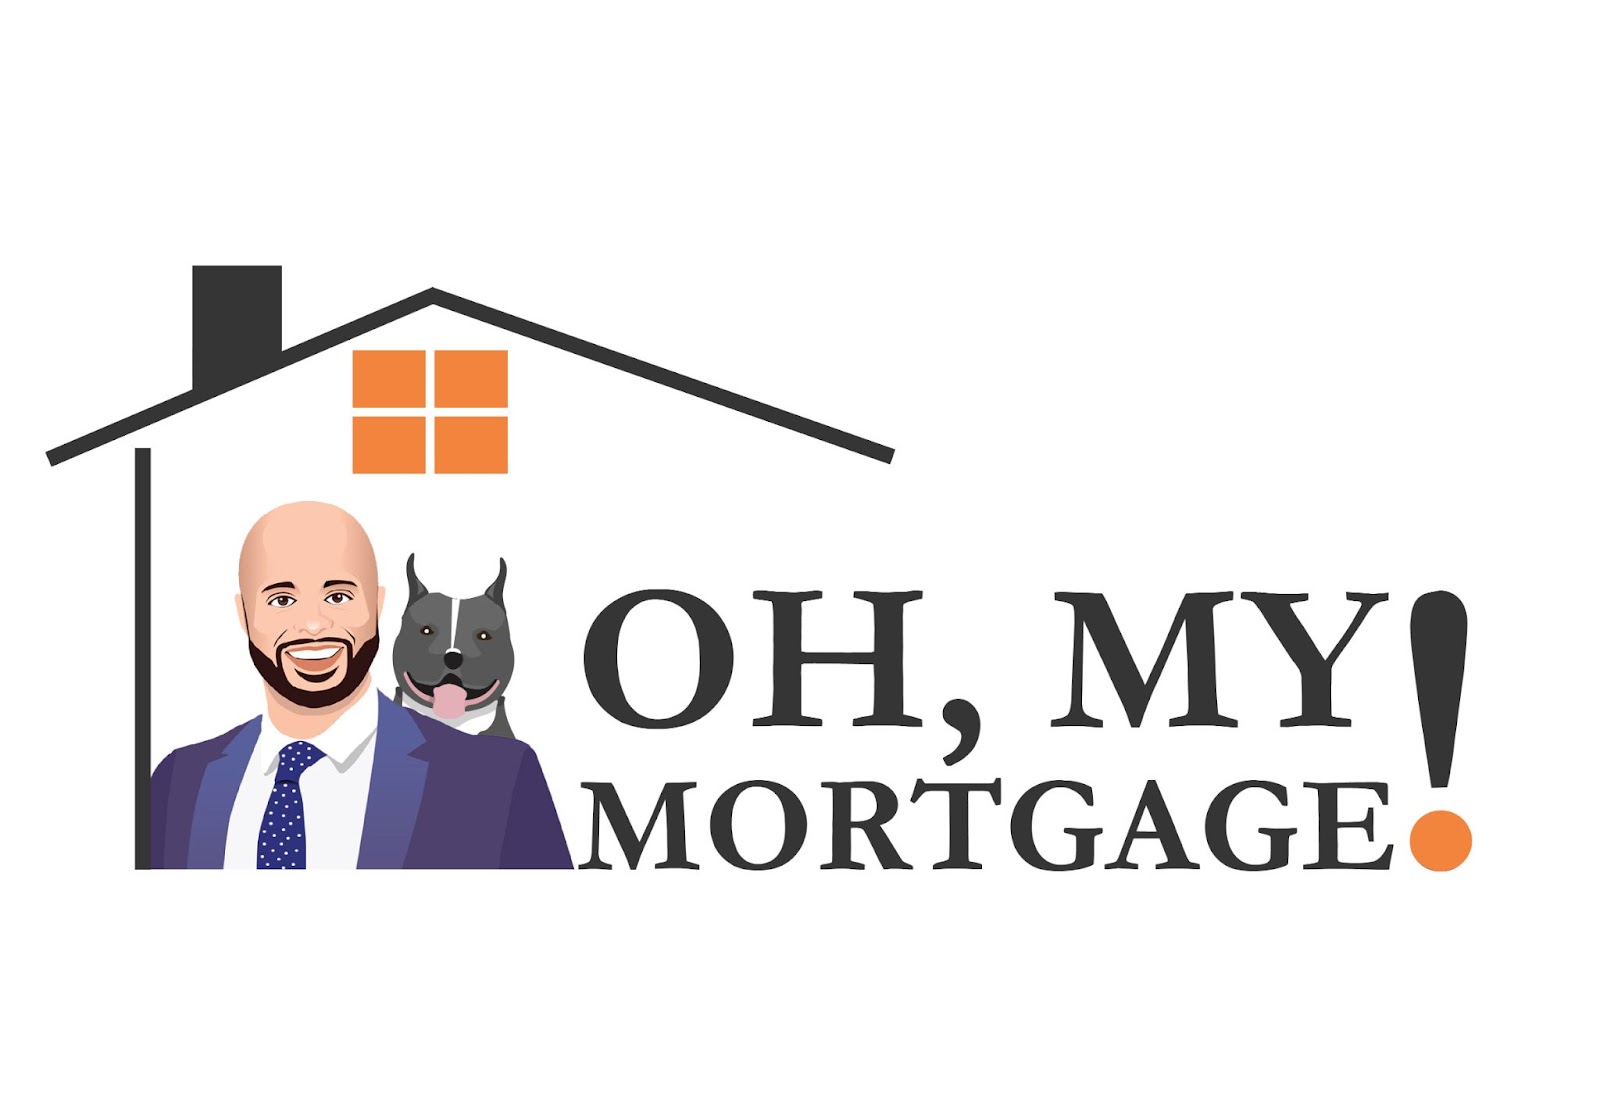 ohmymortgage.ca, Wednesday, July 21, 2021, Press release picture